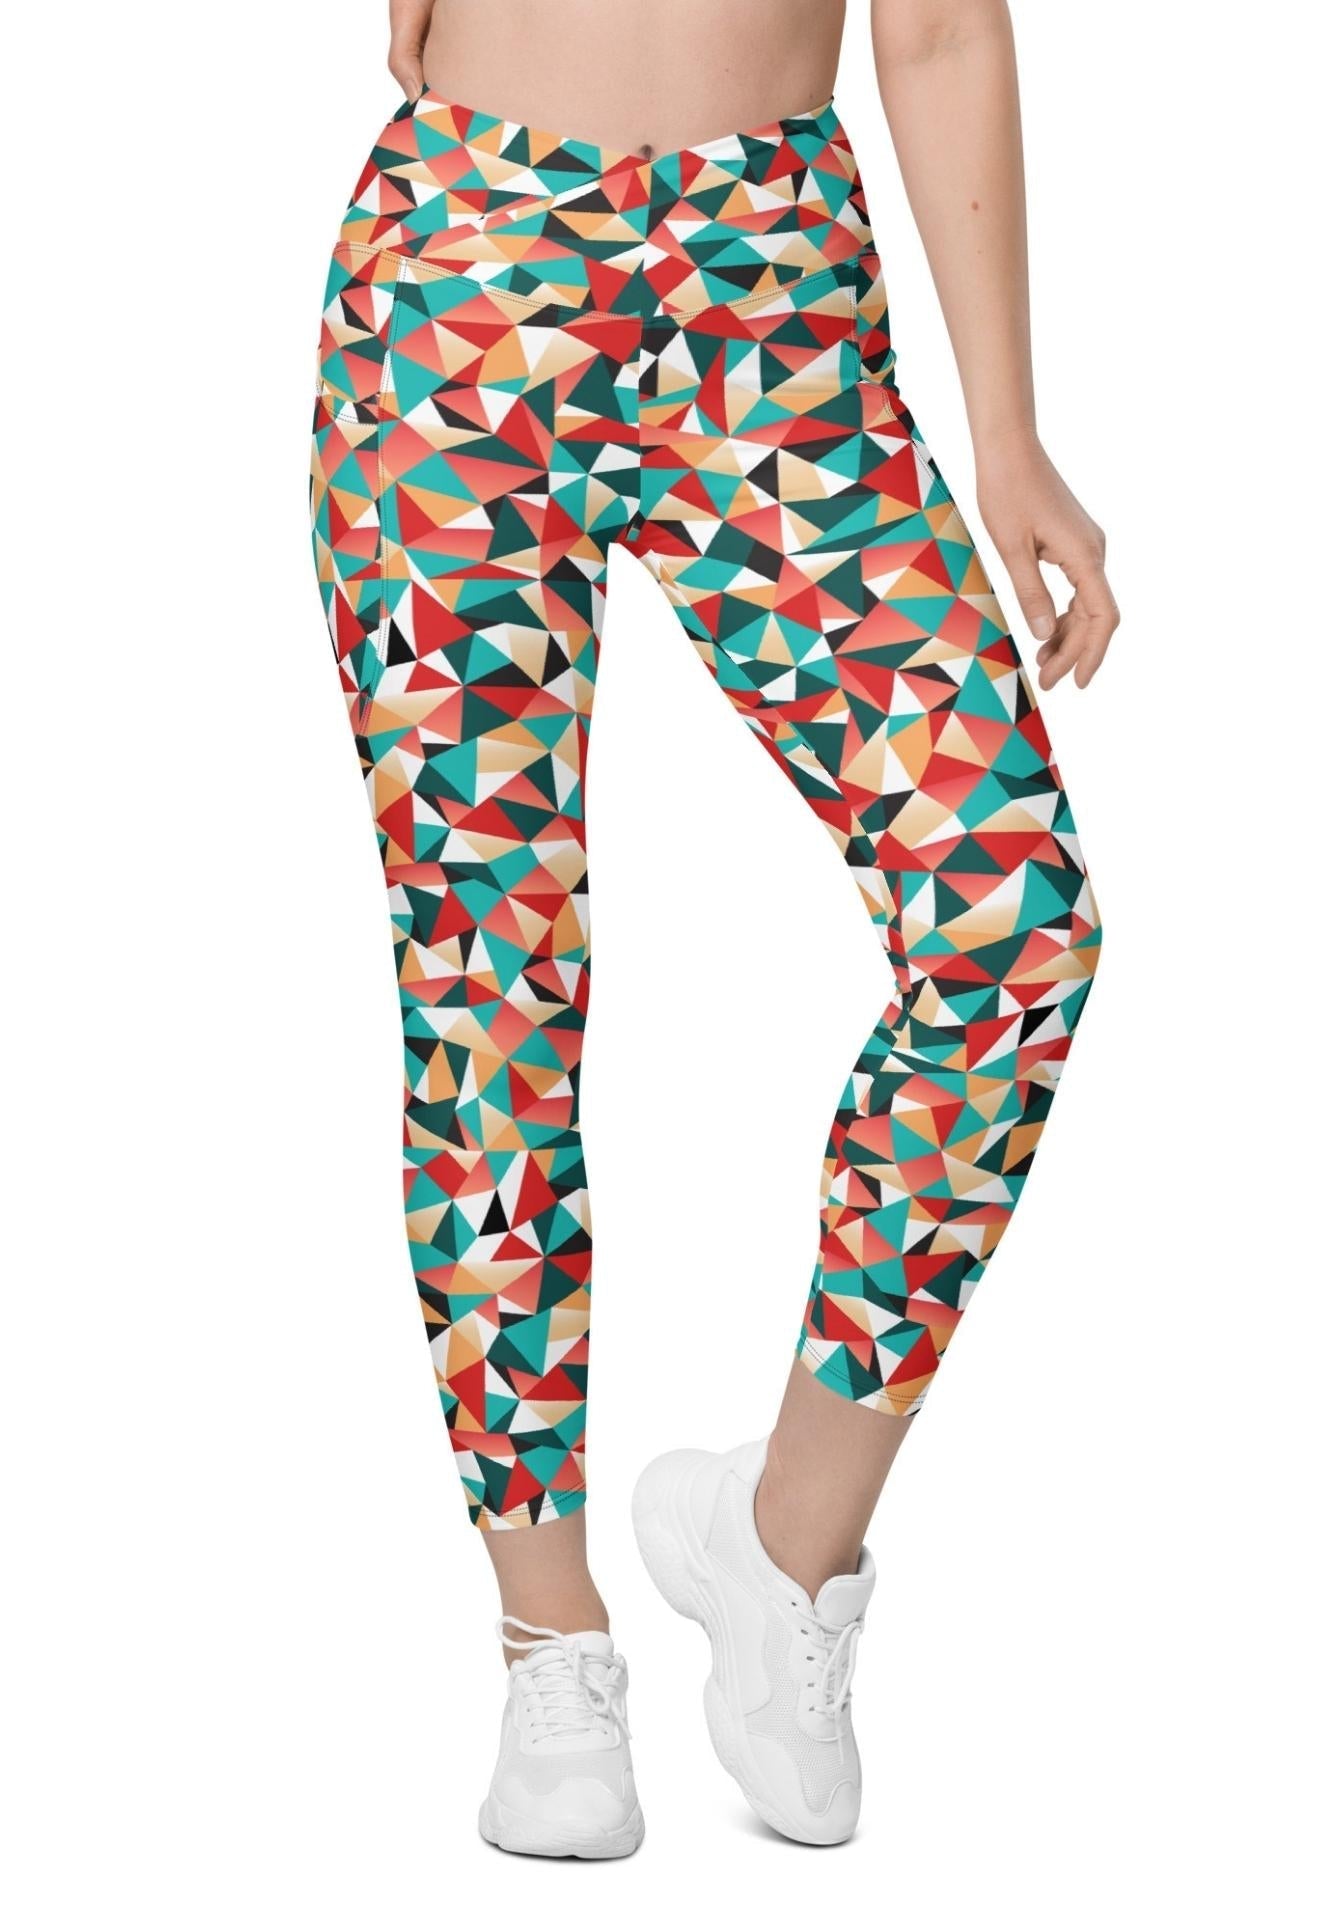 Kaleidoscopic Crossover Leggings With Pockets